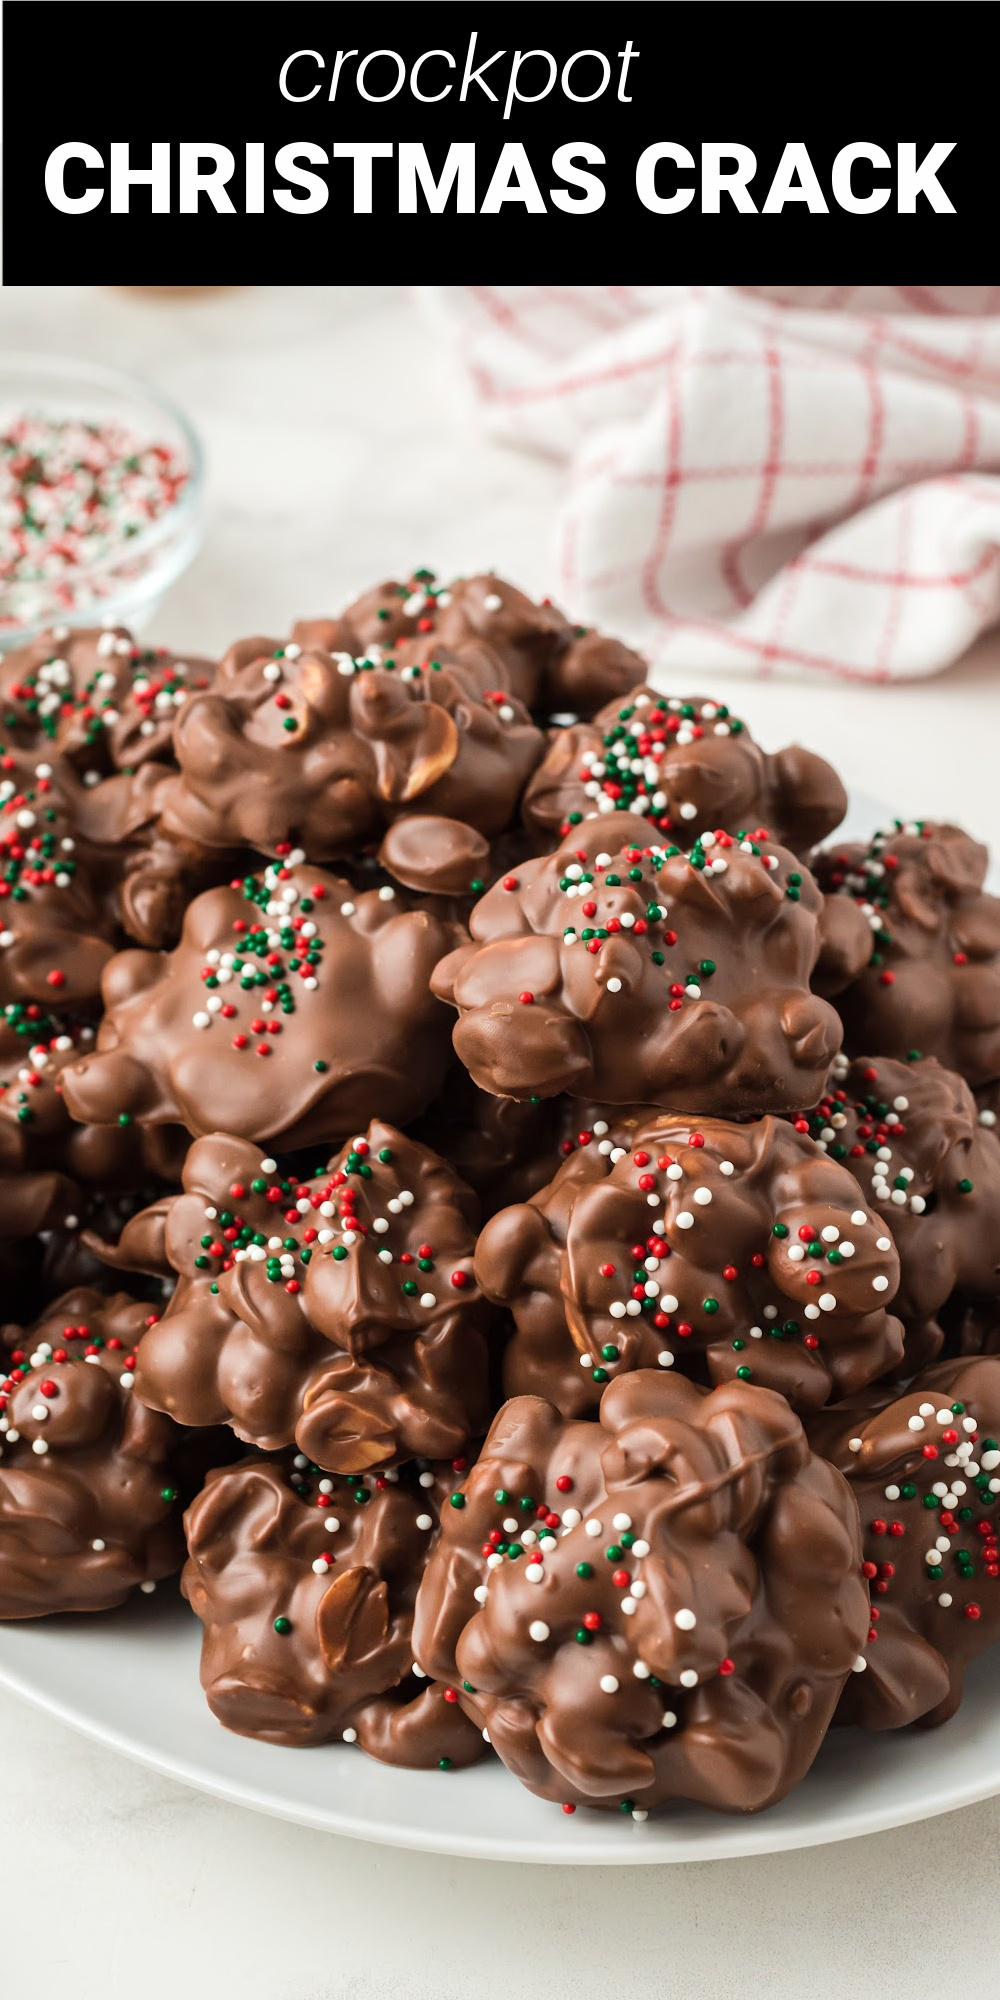 rockpot Christmas Crack is an addicting chocolate Christmas candy you make in your slow cooker. This treat combines white and milk chocolate with salty peanuts. 